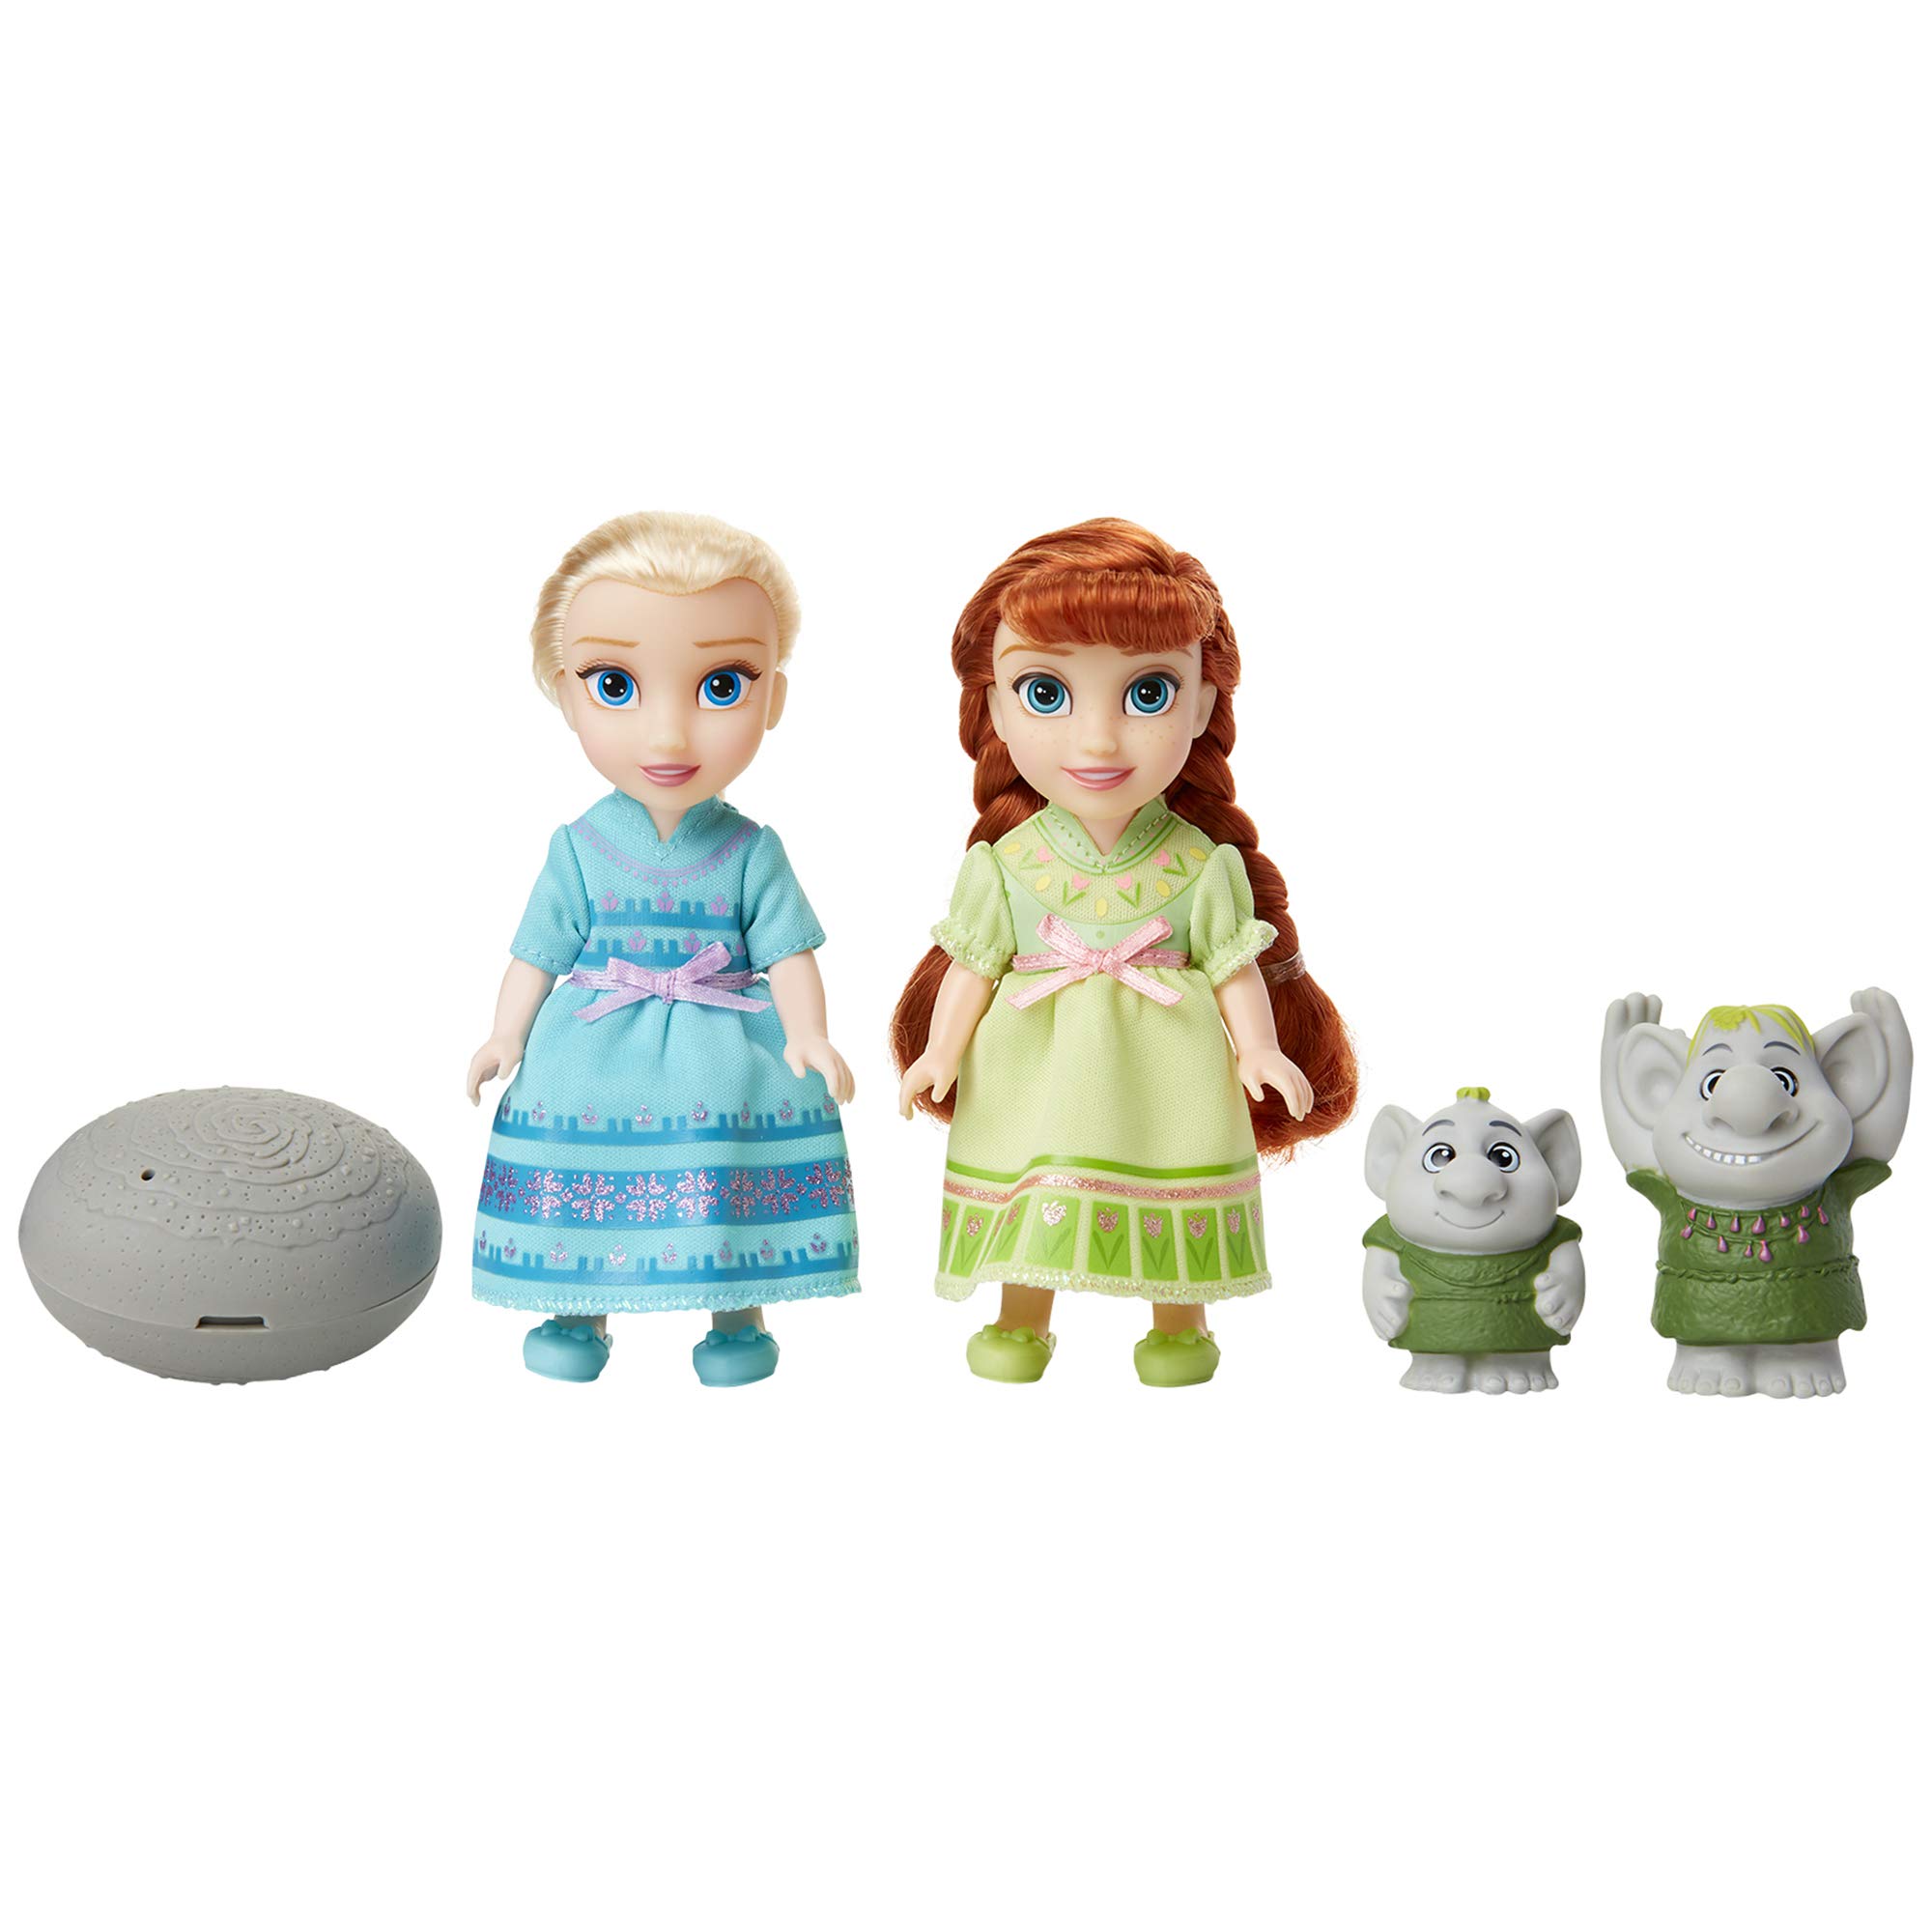 Disney Frozen Petite Anna & Elsa Dolls with Surprise Trolls Gift Set, Each Doll is Approximately 6 inches Tall - Includes 2 Troll Friends! Perfect for Any Frozen Fan!